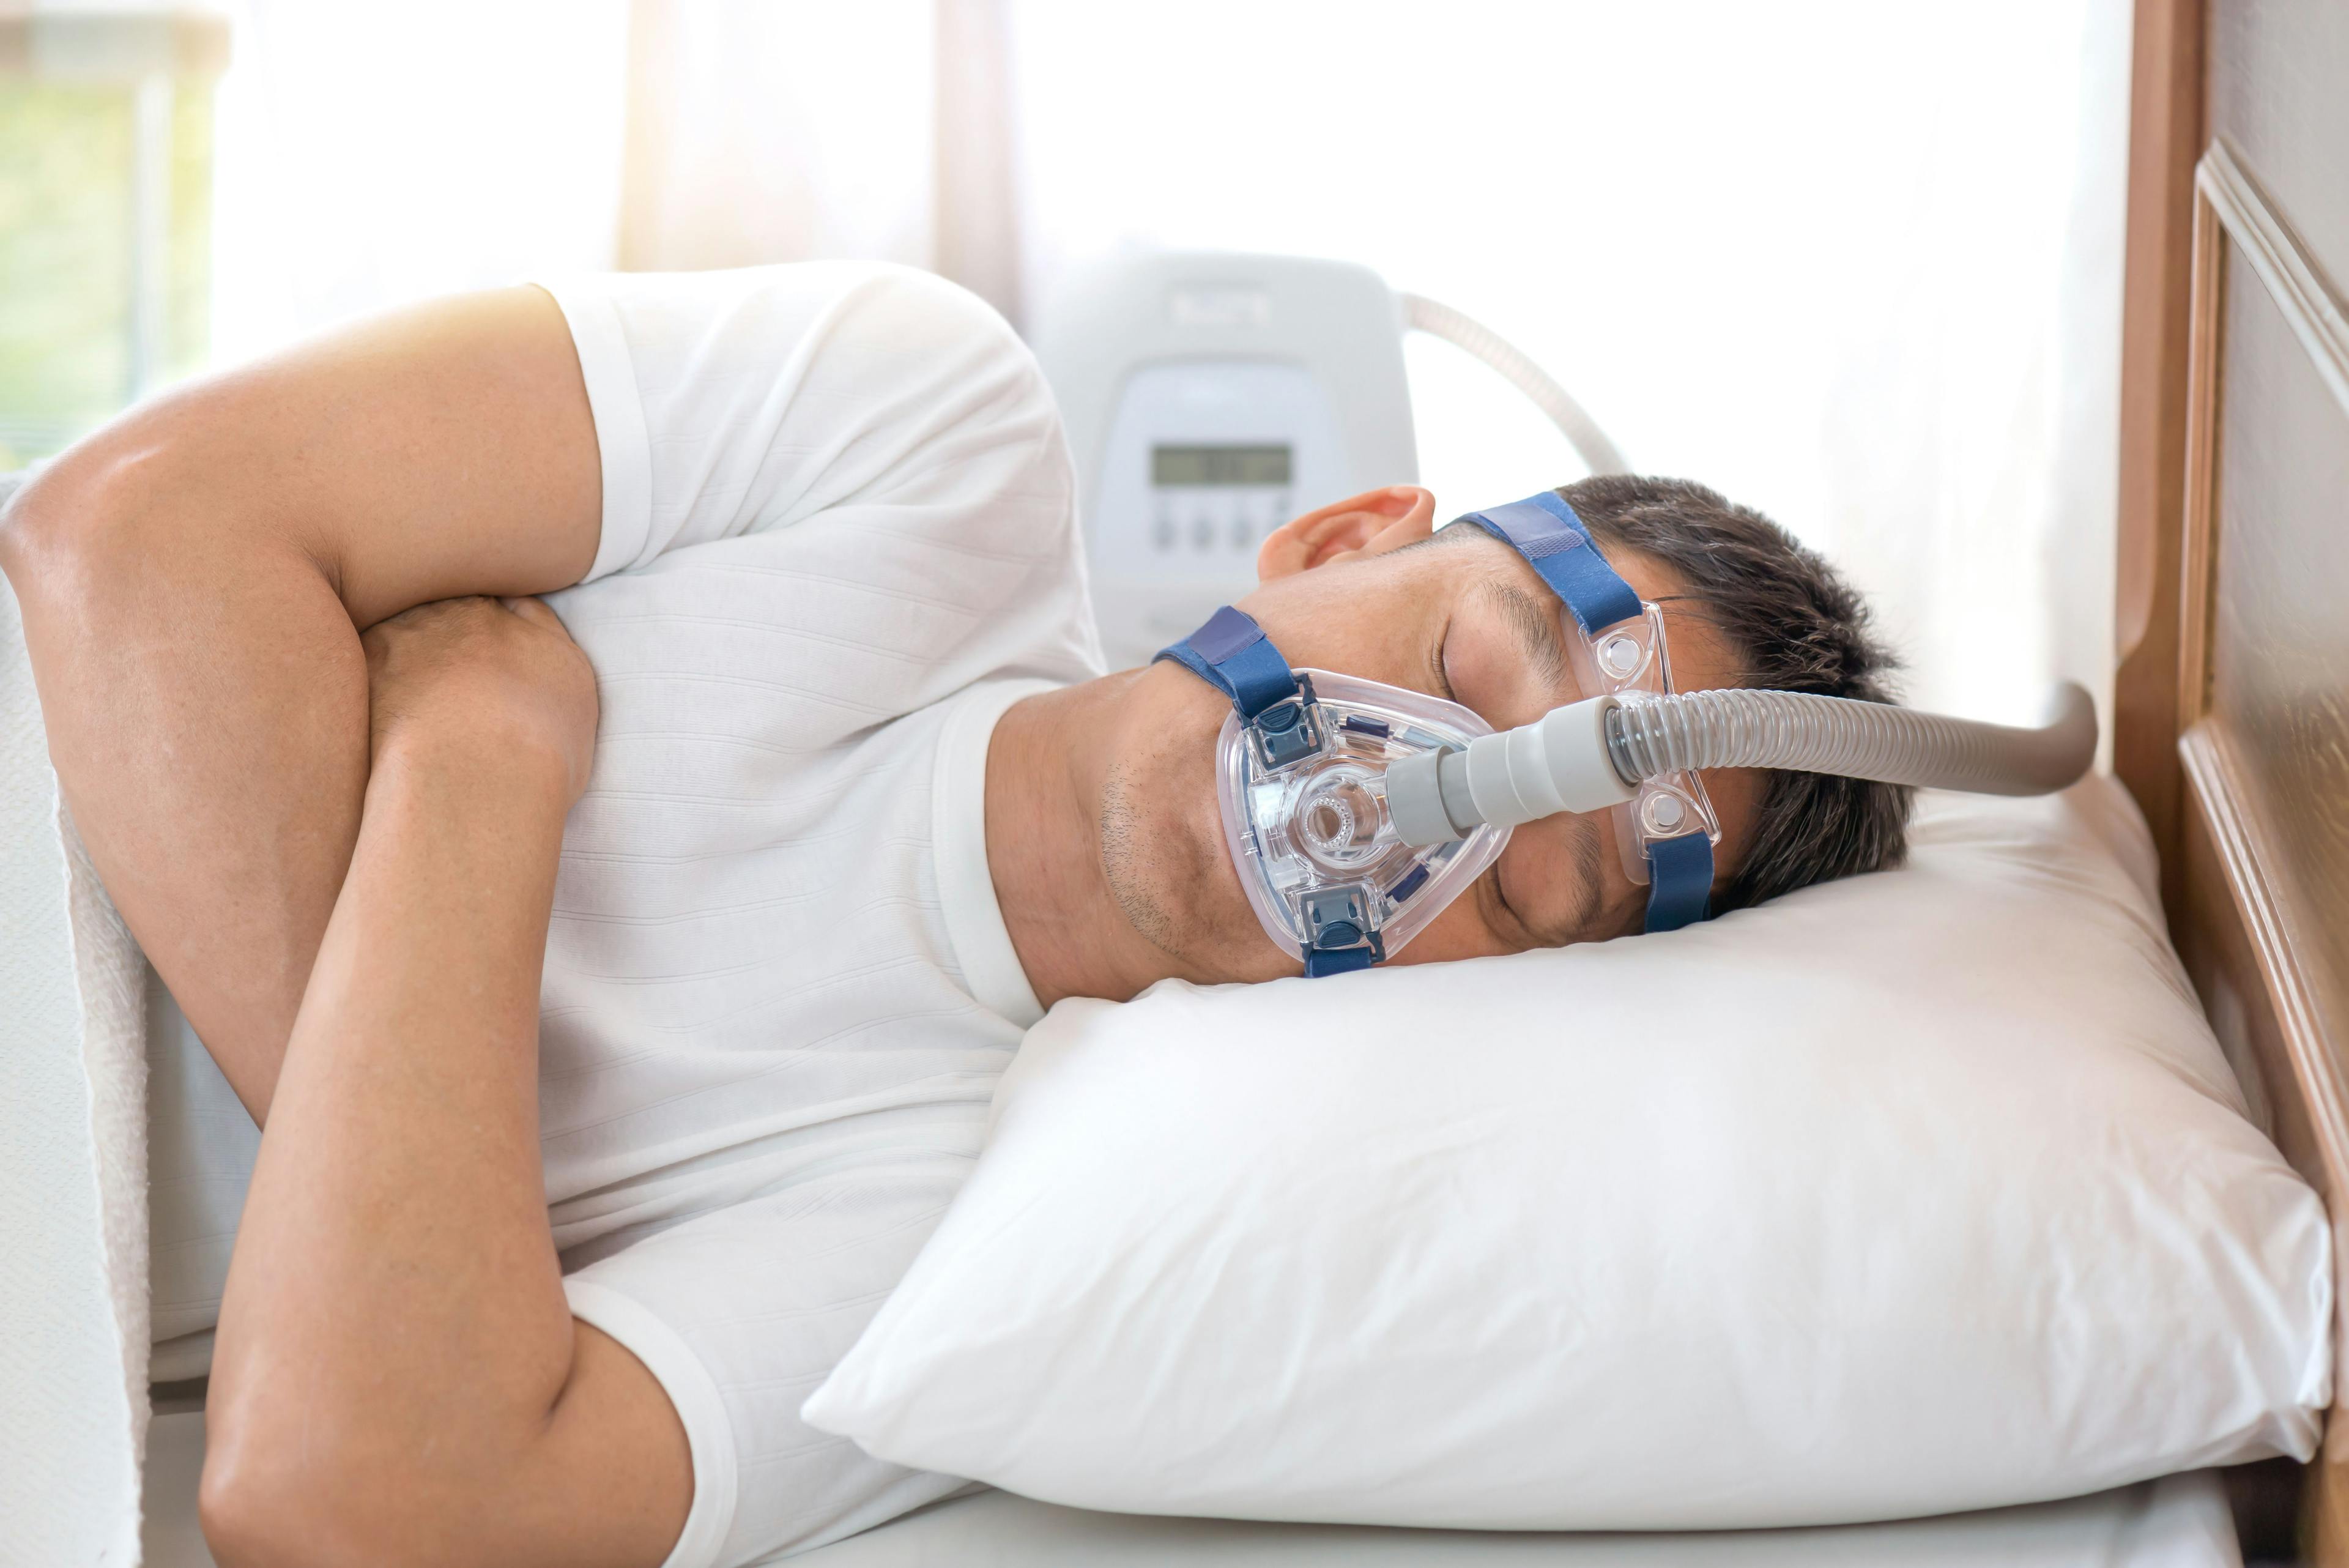 Man sleeping in bed wearing CPAP mask ,sleep apnea therapy.Happy and healthy senior man sleeping deeply on his left side without snoring. Credit: sbw19 - stock.adobe.com